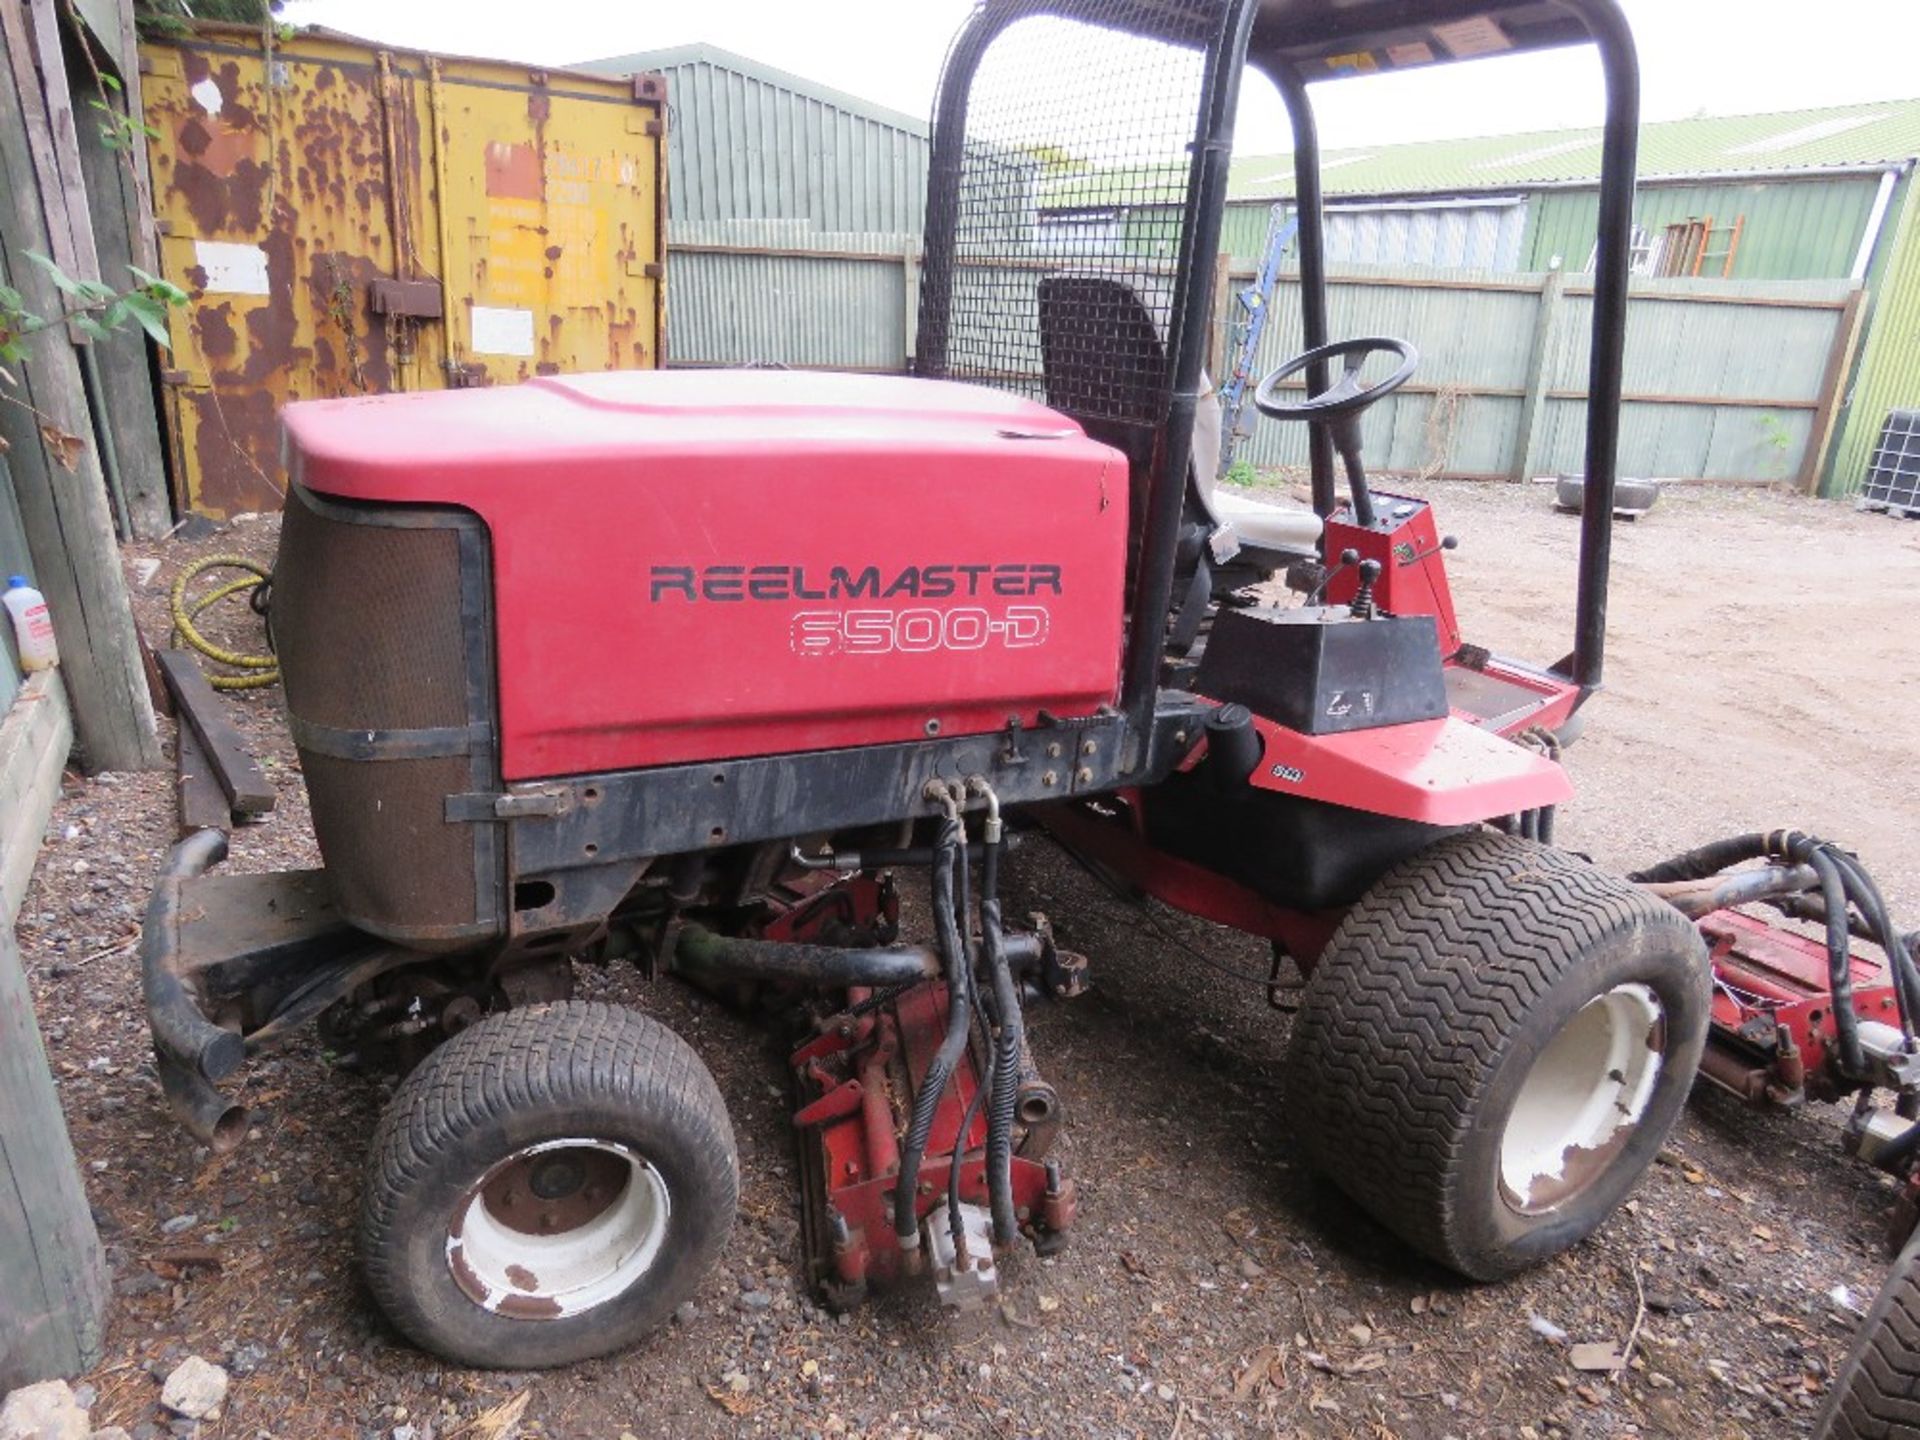 TORO REELMASTER 6500D 5 GANG 4WD MOWER, EX GOLF COURSE. WHEN TESTED WAS SEEN TO RUN, DRIVE AND BLADE - Image 4 of 5